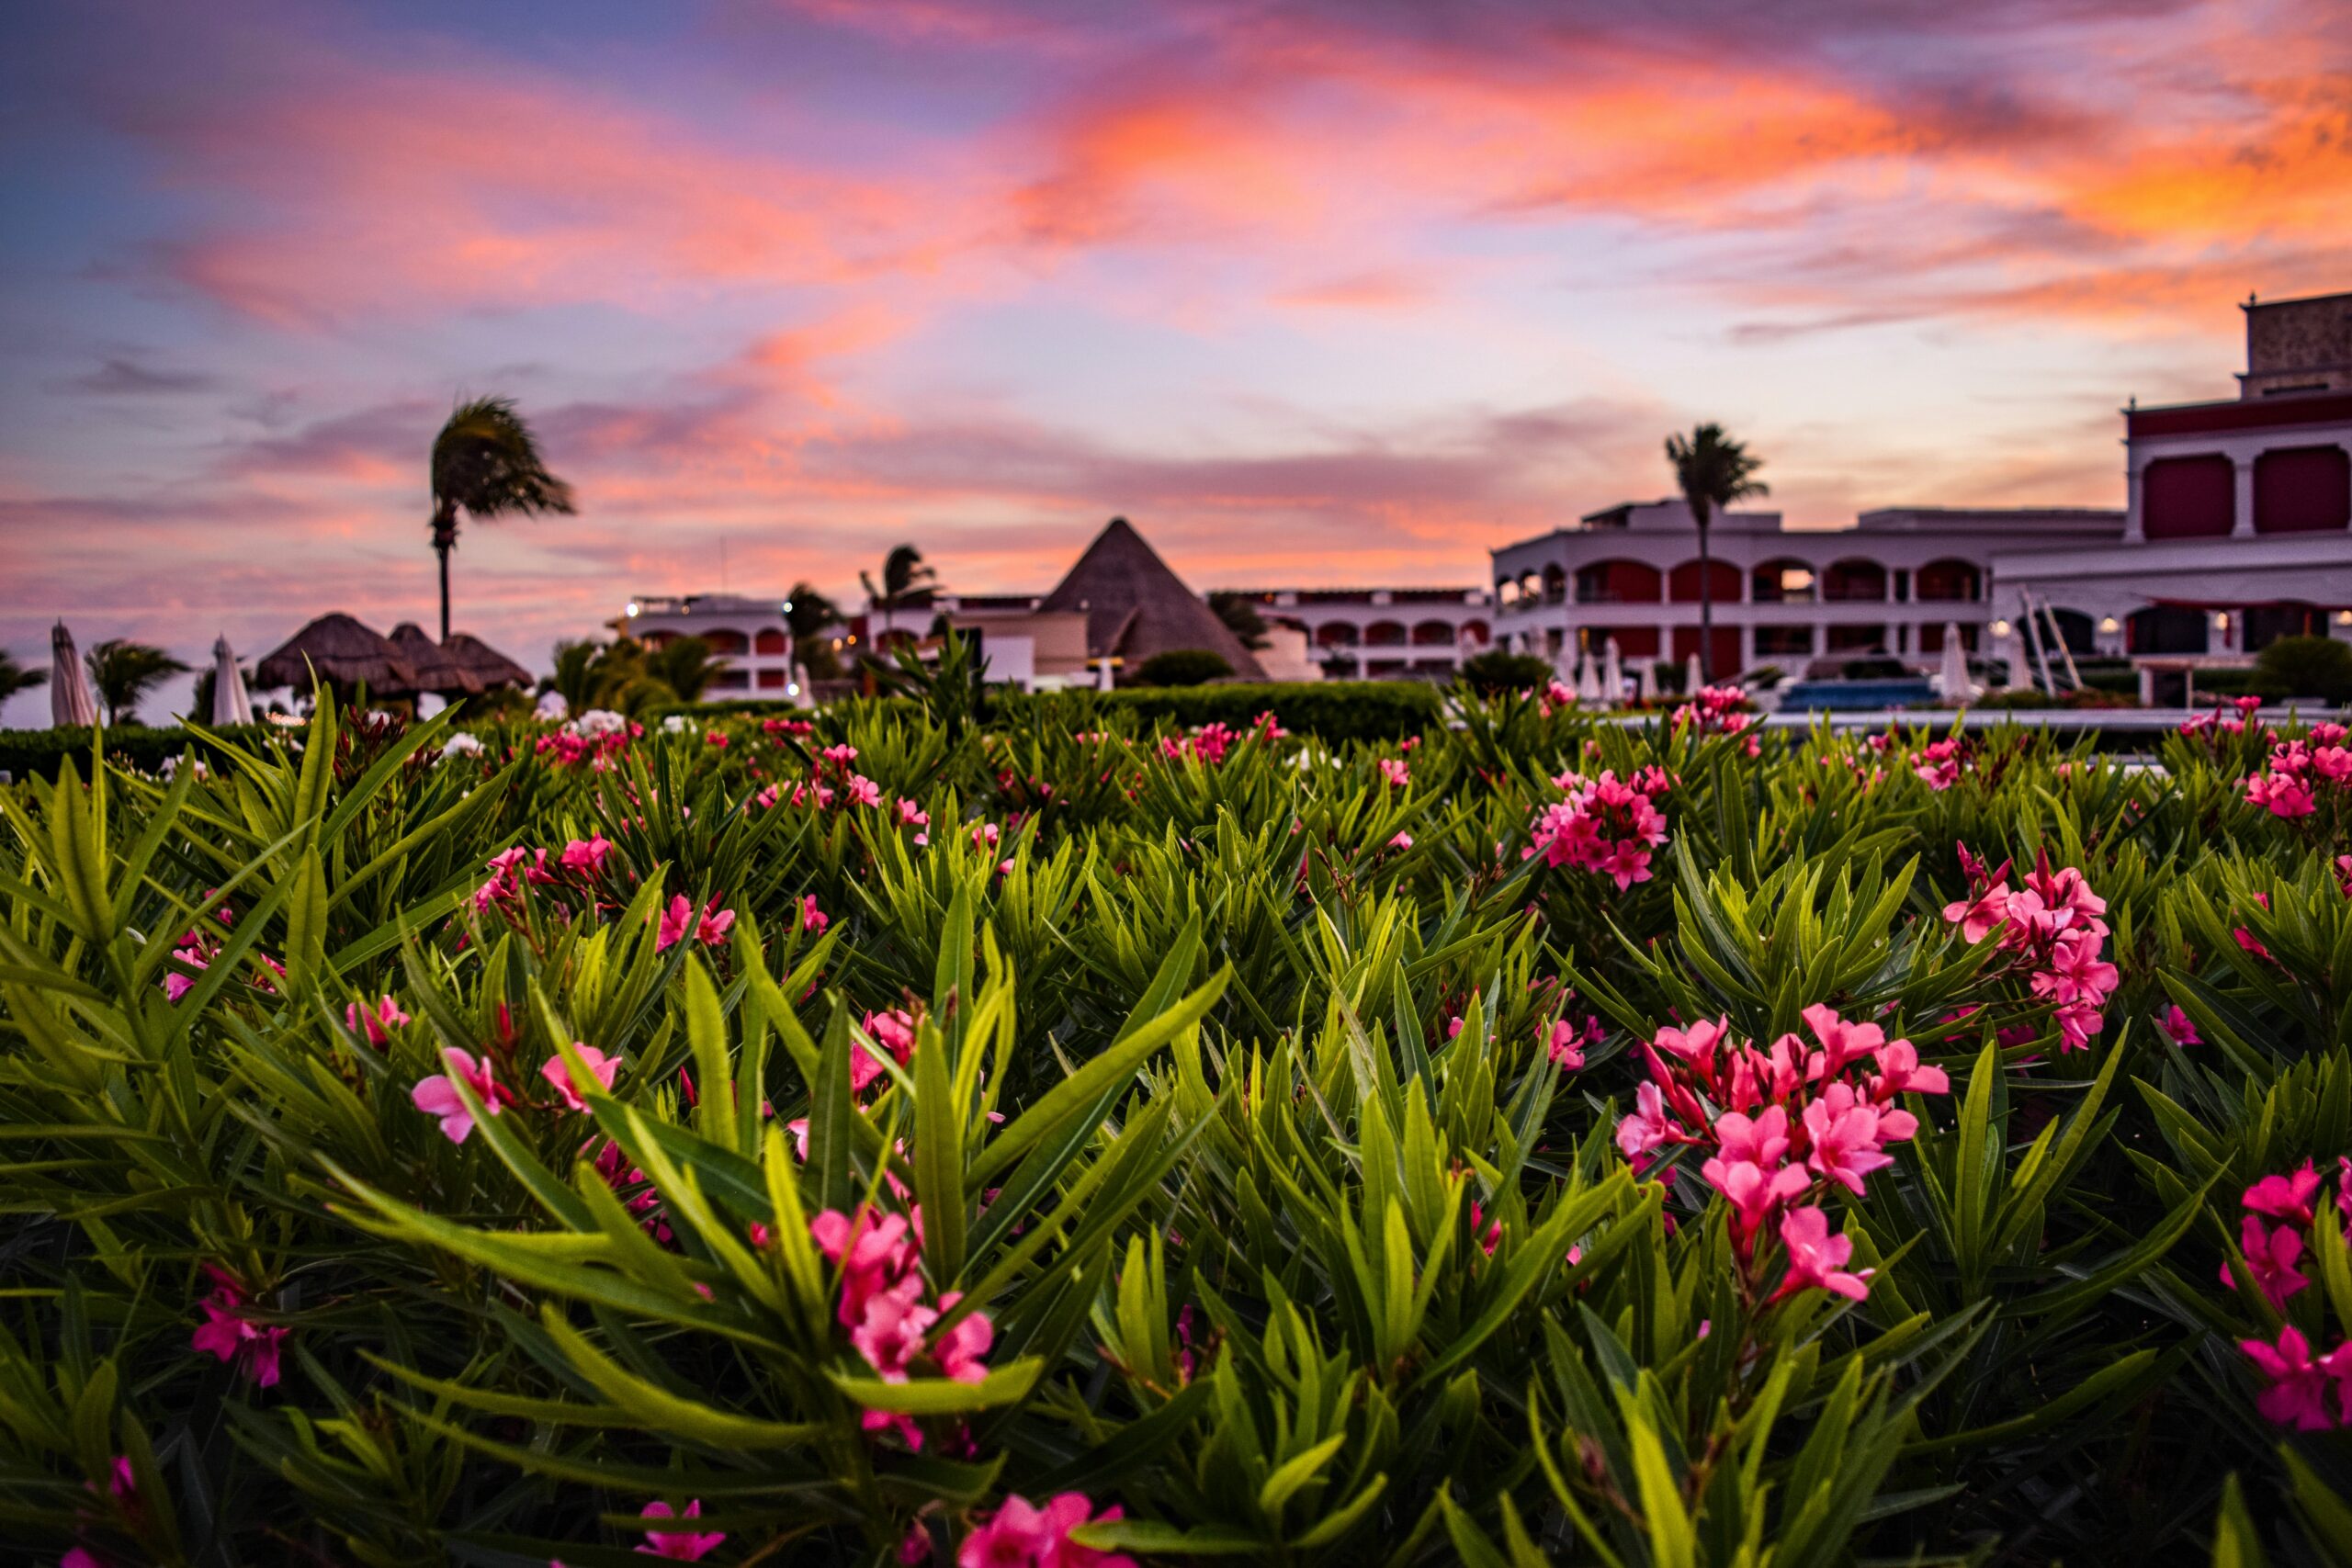 These travel advisories are the number one resources for travelers that want to visit Riviera Maya.
pictured: a field of lush green flowered bushes in the front of a Riviera Maya beach resort during sunset